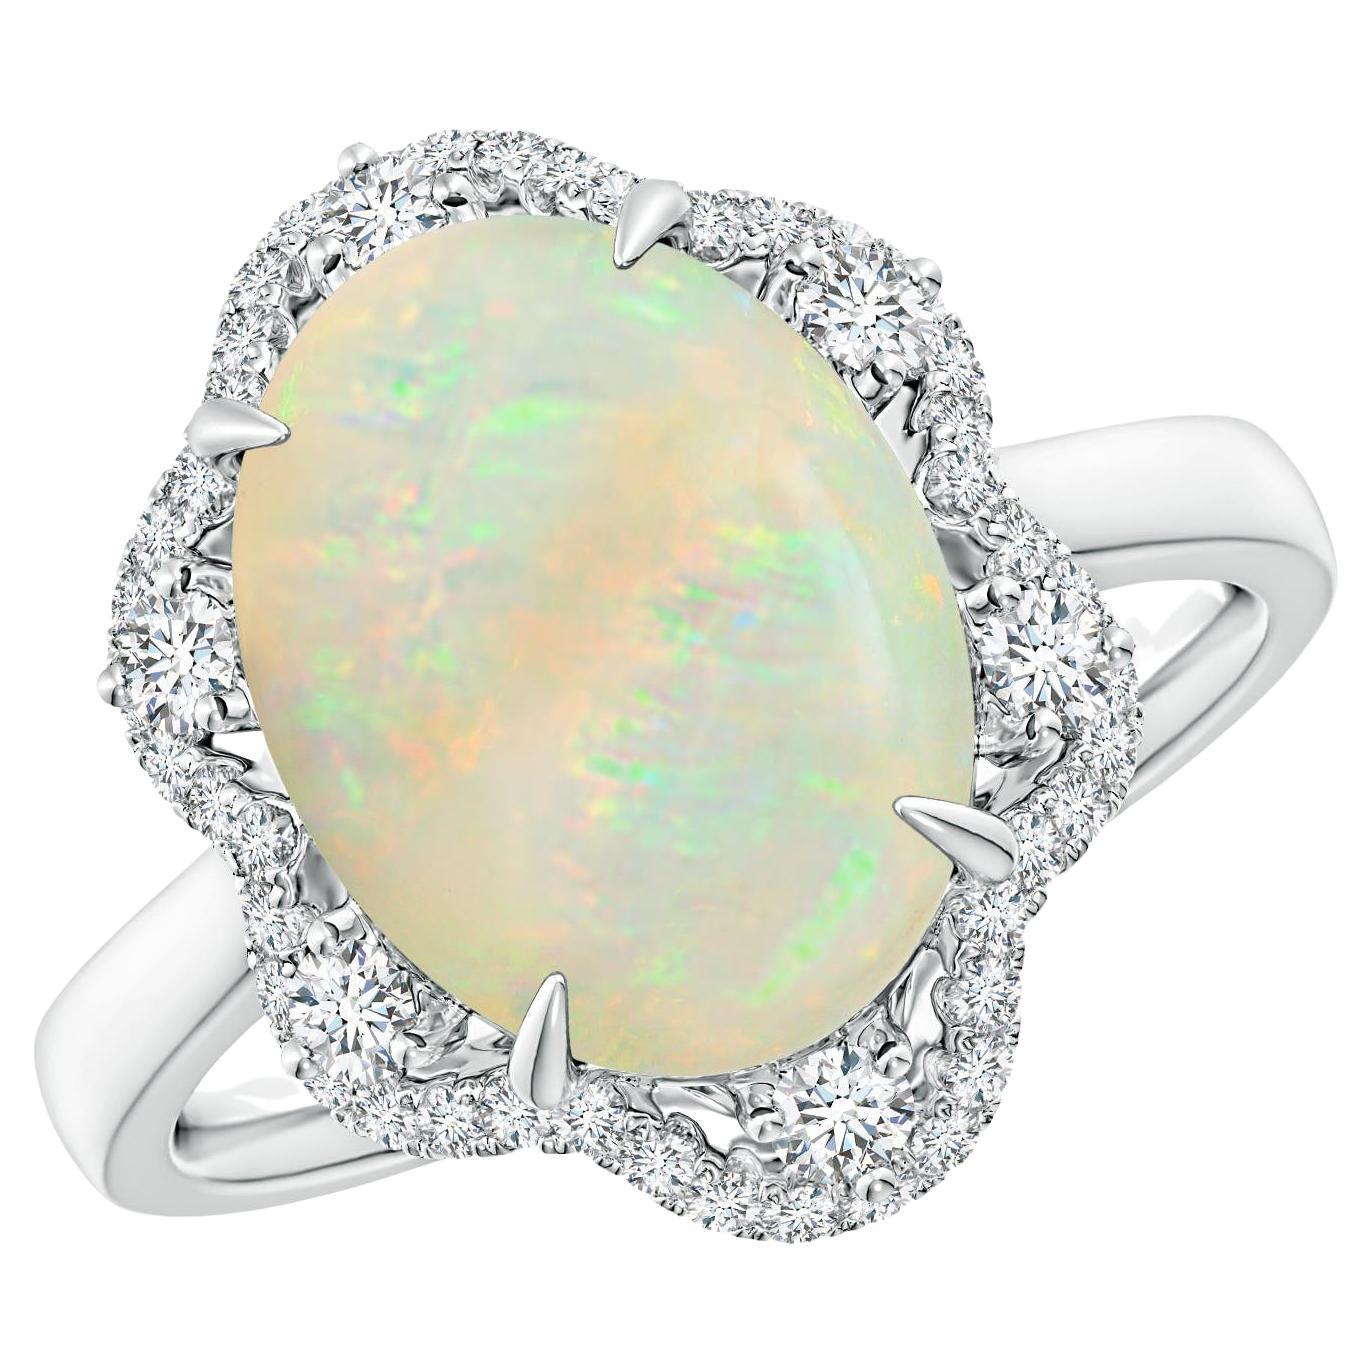 For Sale:  Angara Gia Certified Natural Opal Ring in Platinum with Reverse Tapered Shank